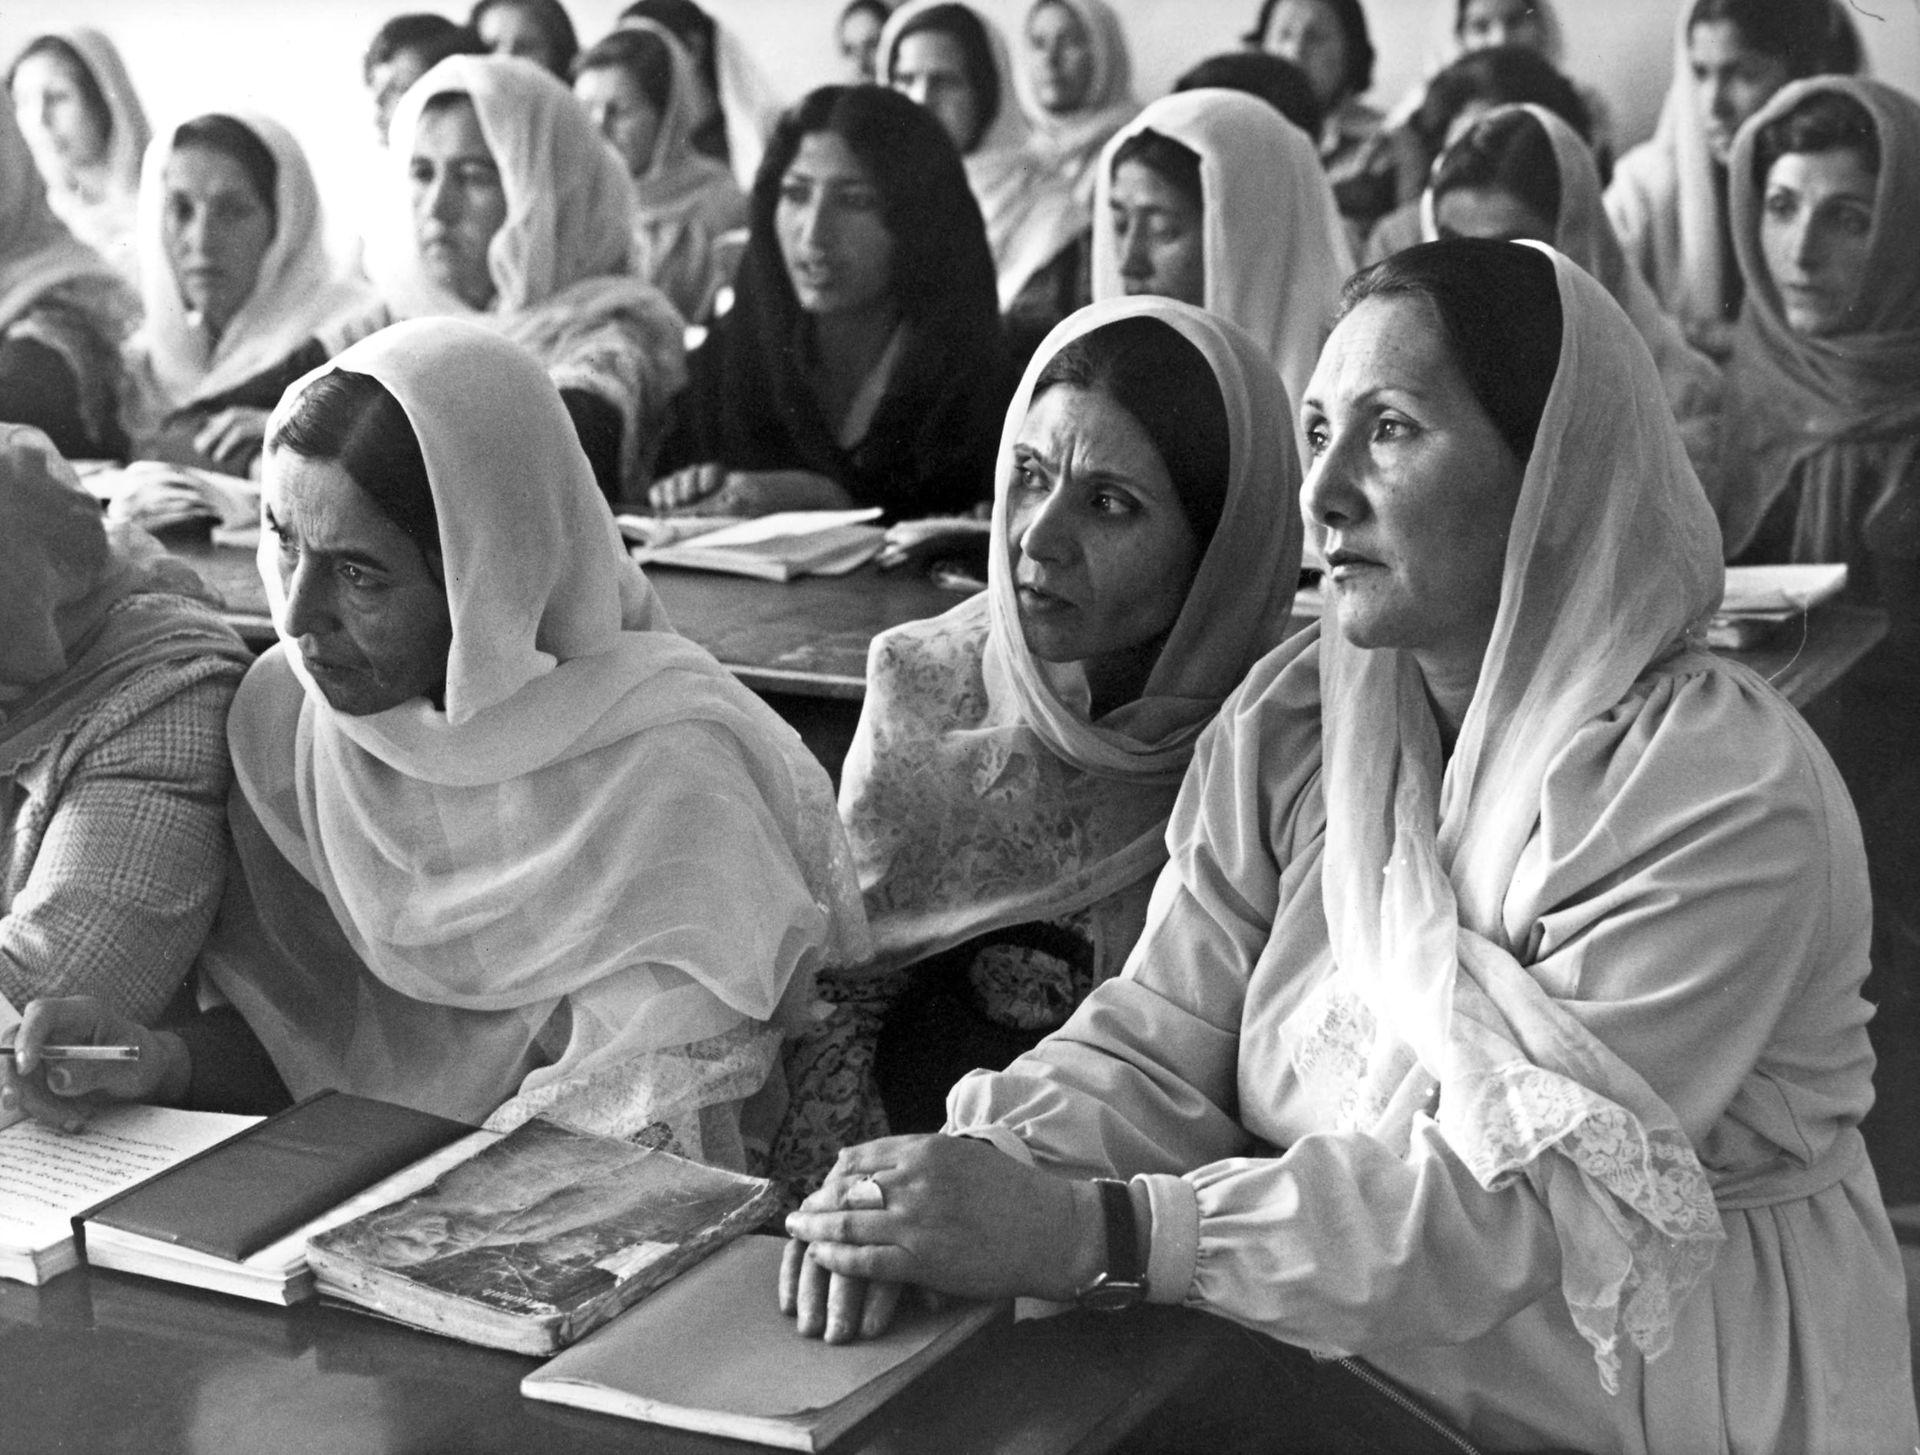 Photo by AFP: Afghan women attend a workplace literacy course in Kabul in the 1980s